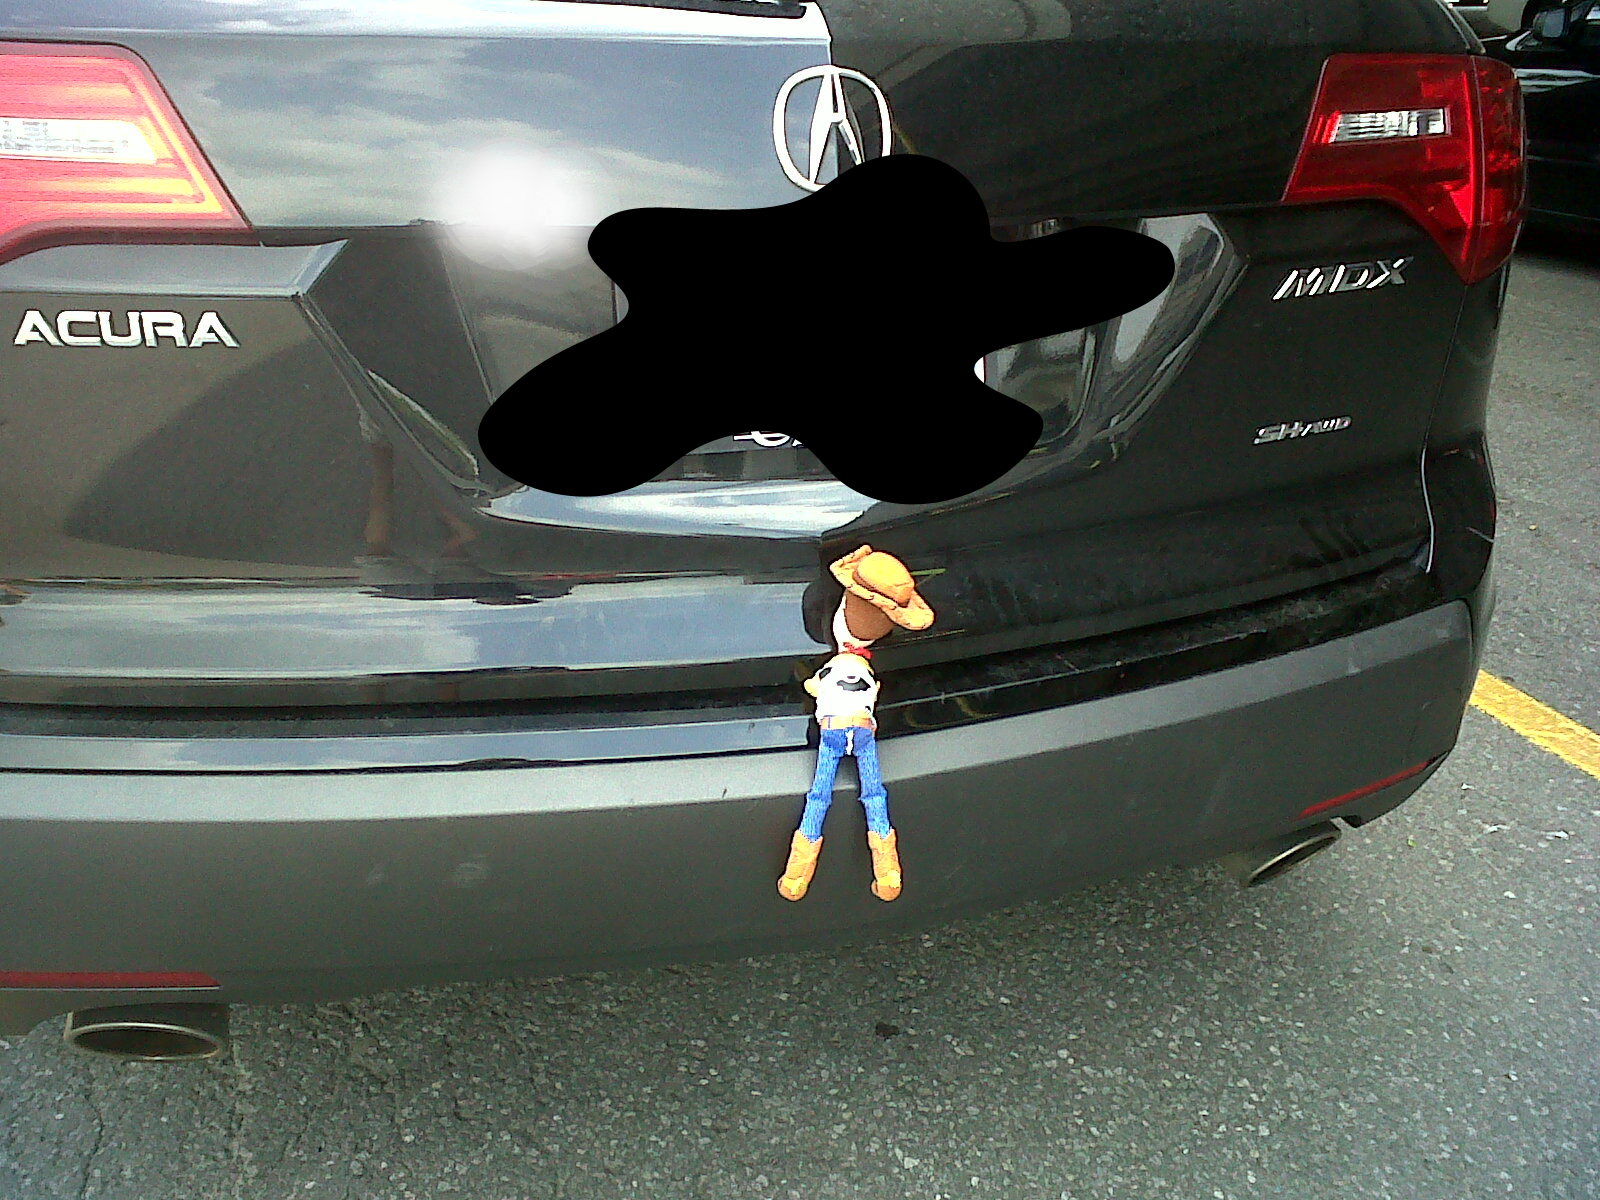 Woody almost got left behind...